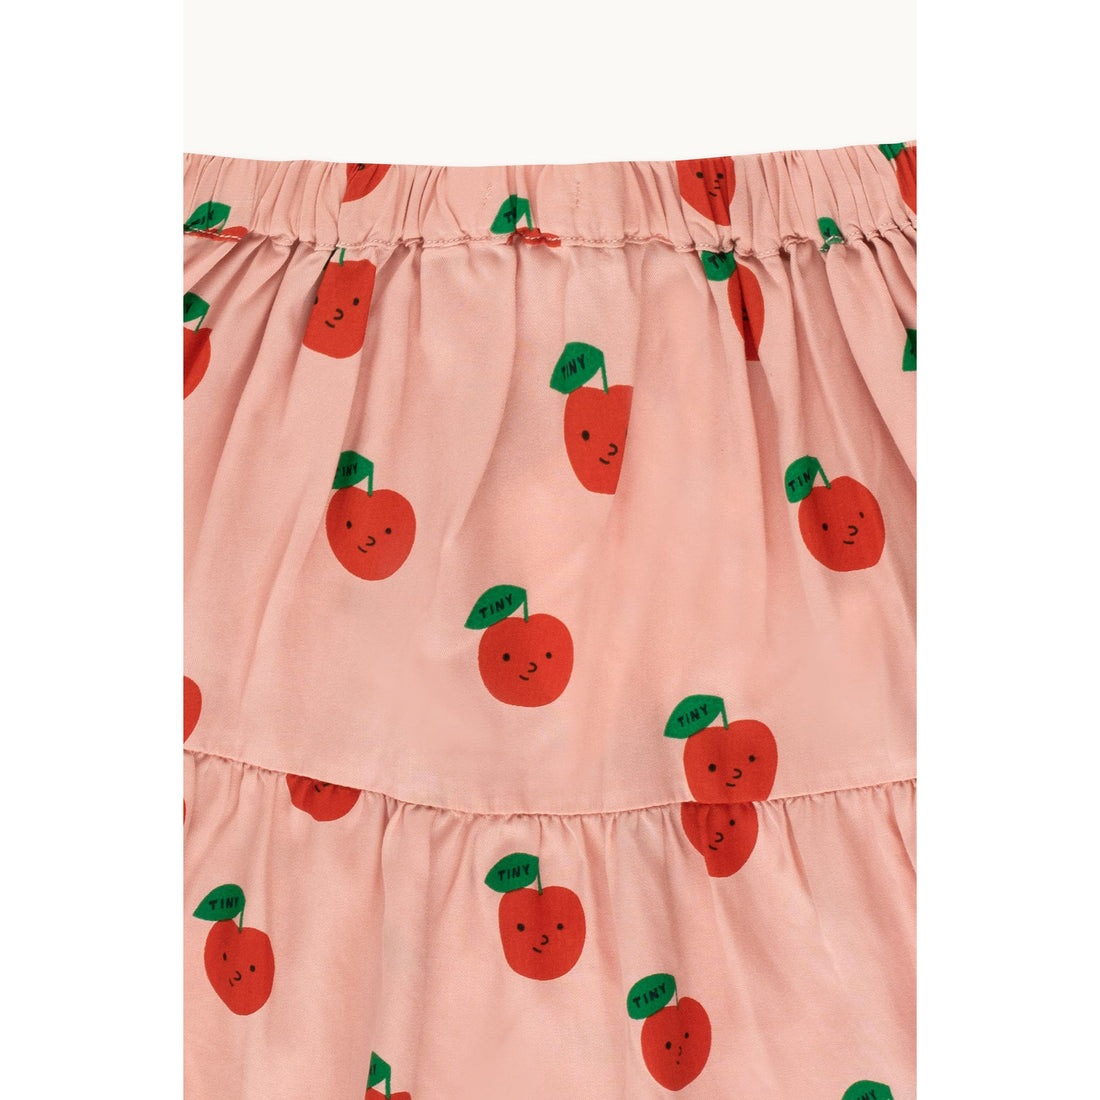 tinycottons-apple-skirt-pp-tico-w22173k68-pp-4y- (3)